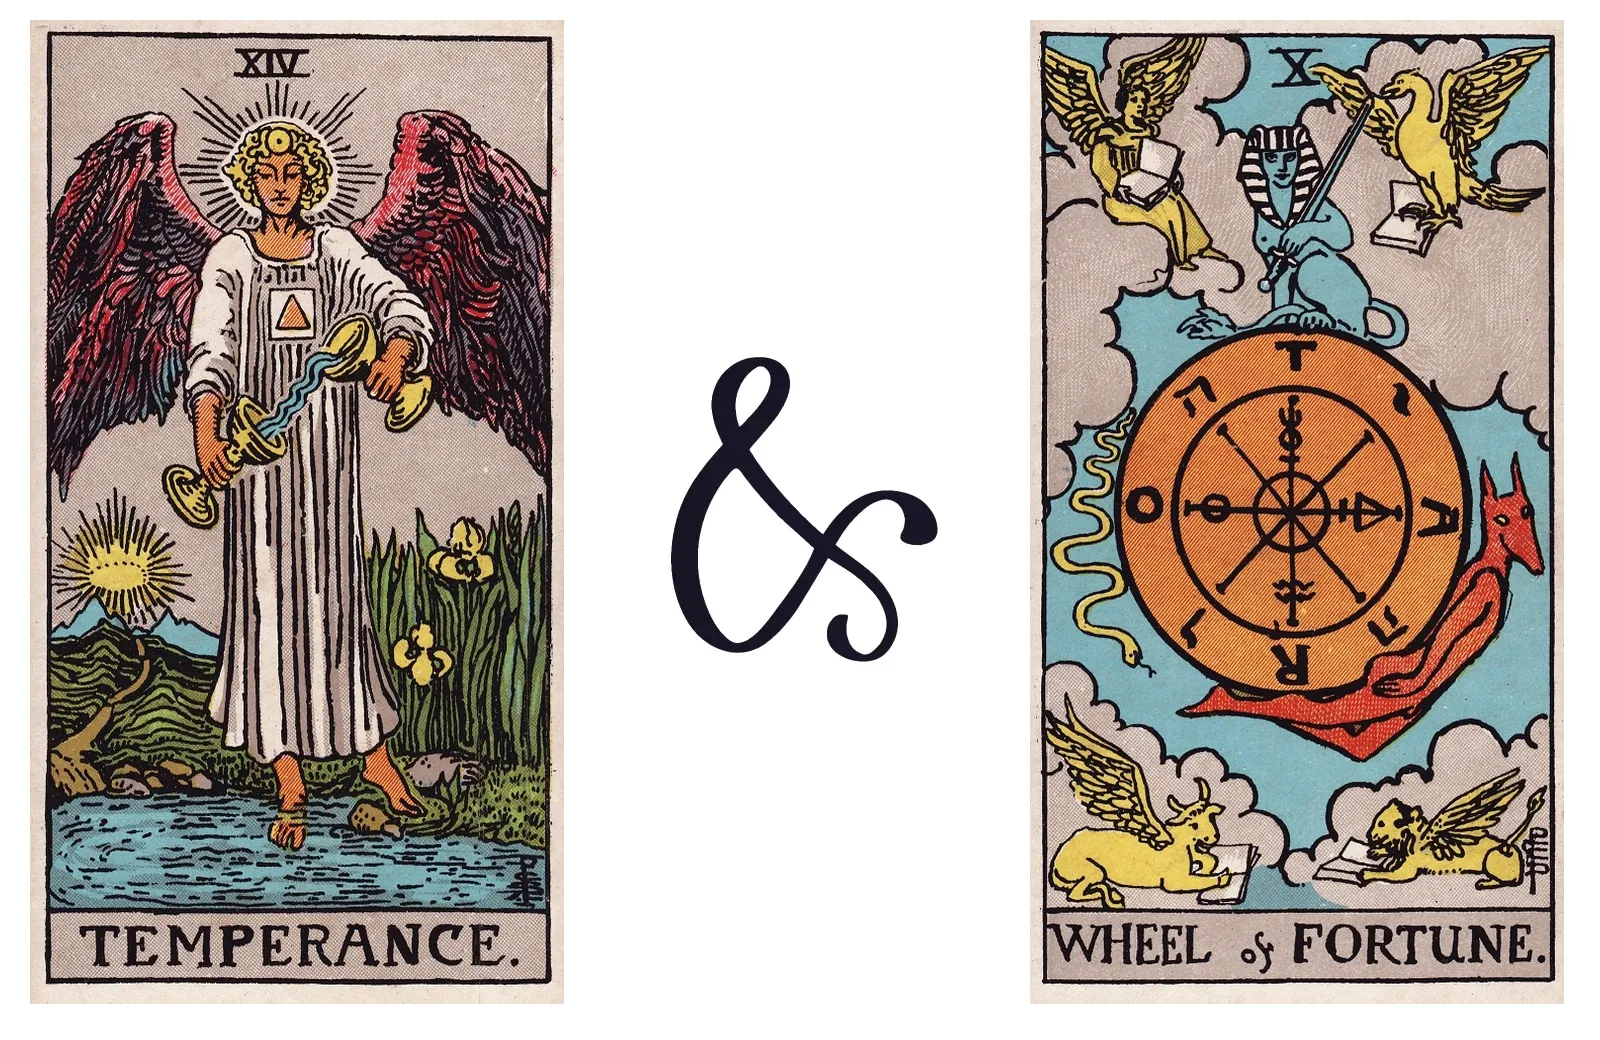 Temperance and Wheel of Fortune